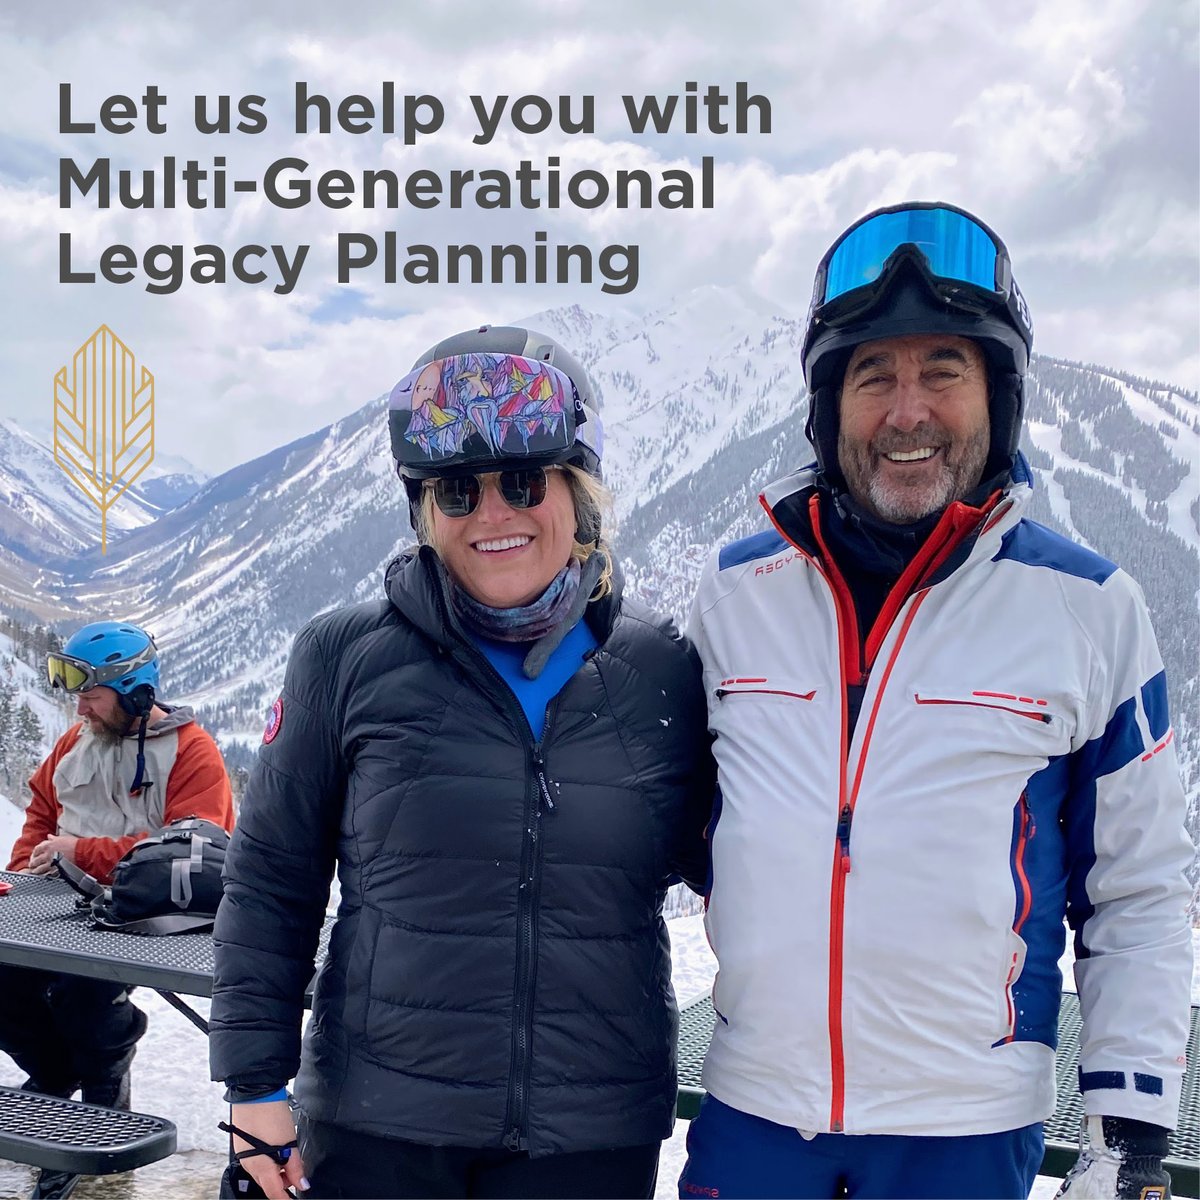 As a father-daughter team, we are especially equipped to handle your legacy planning needs. We use our collective wisdom to truly understand you and your family’s personal and financial goals. Learn more: bit.ly/3jh4kxw 

#BrentwoodFinancial #FinancialAdvisors #WealthAdv